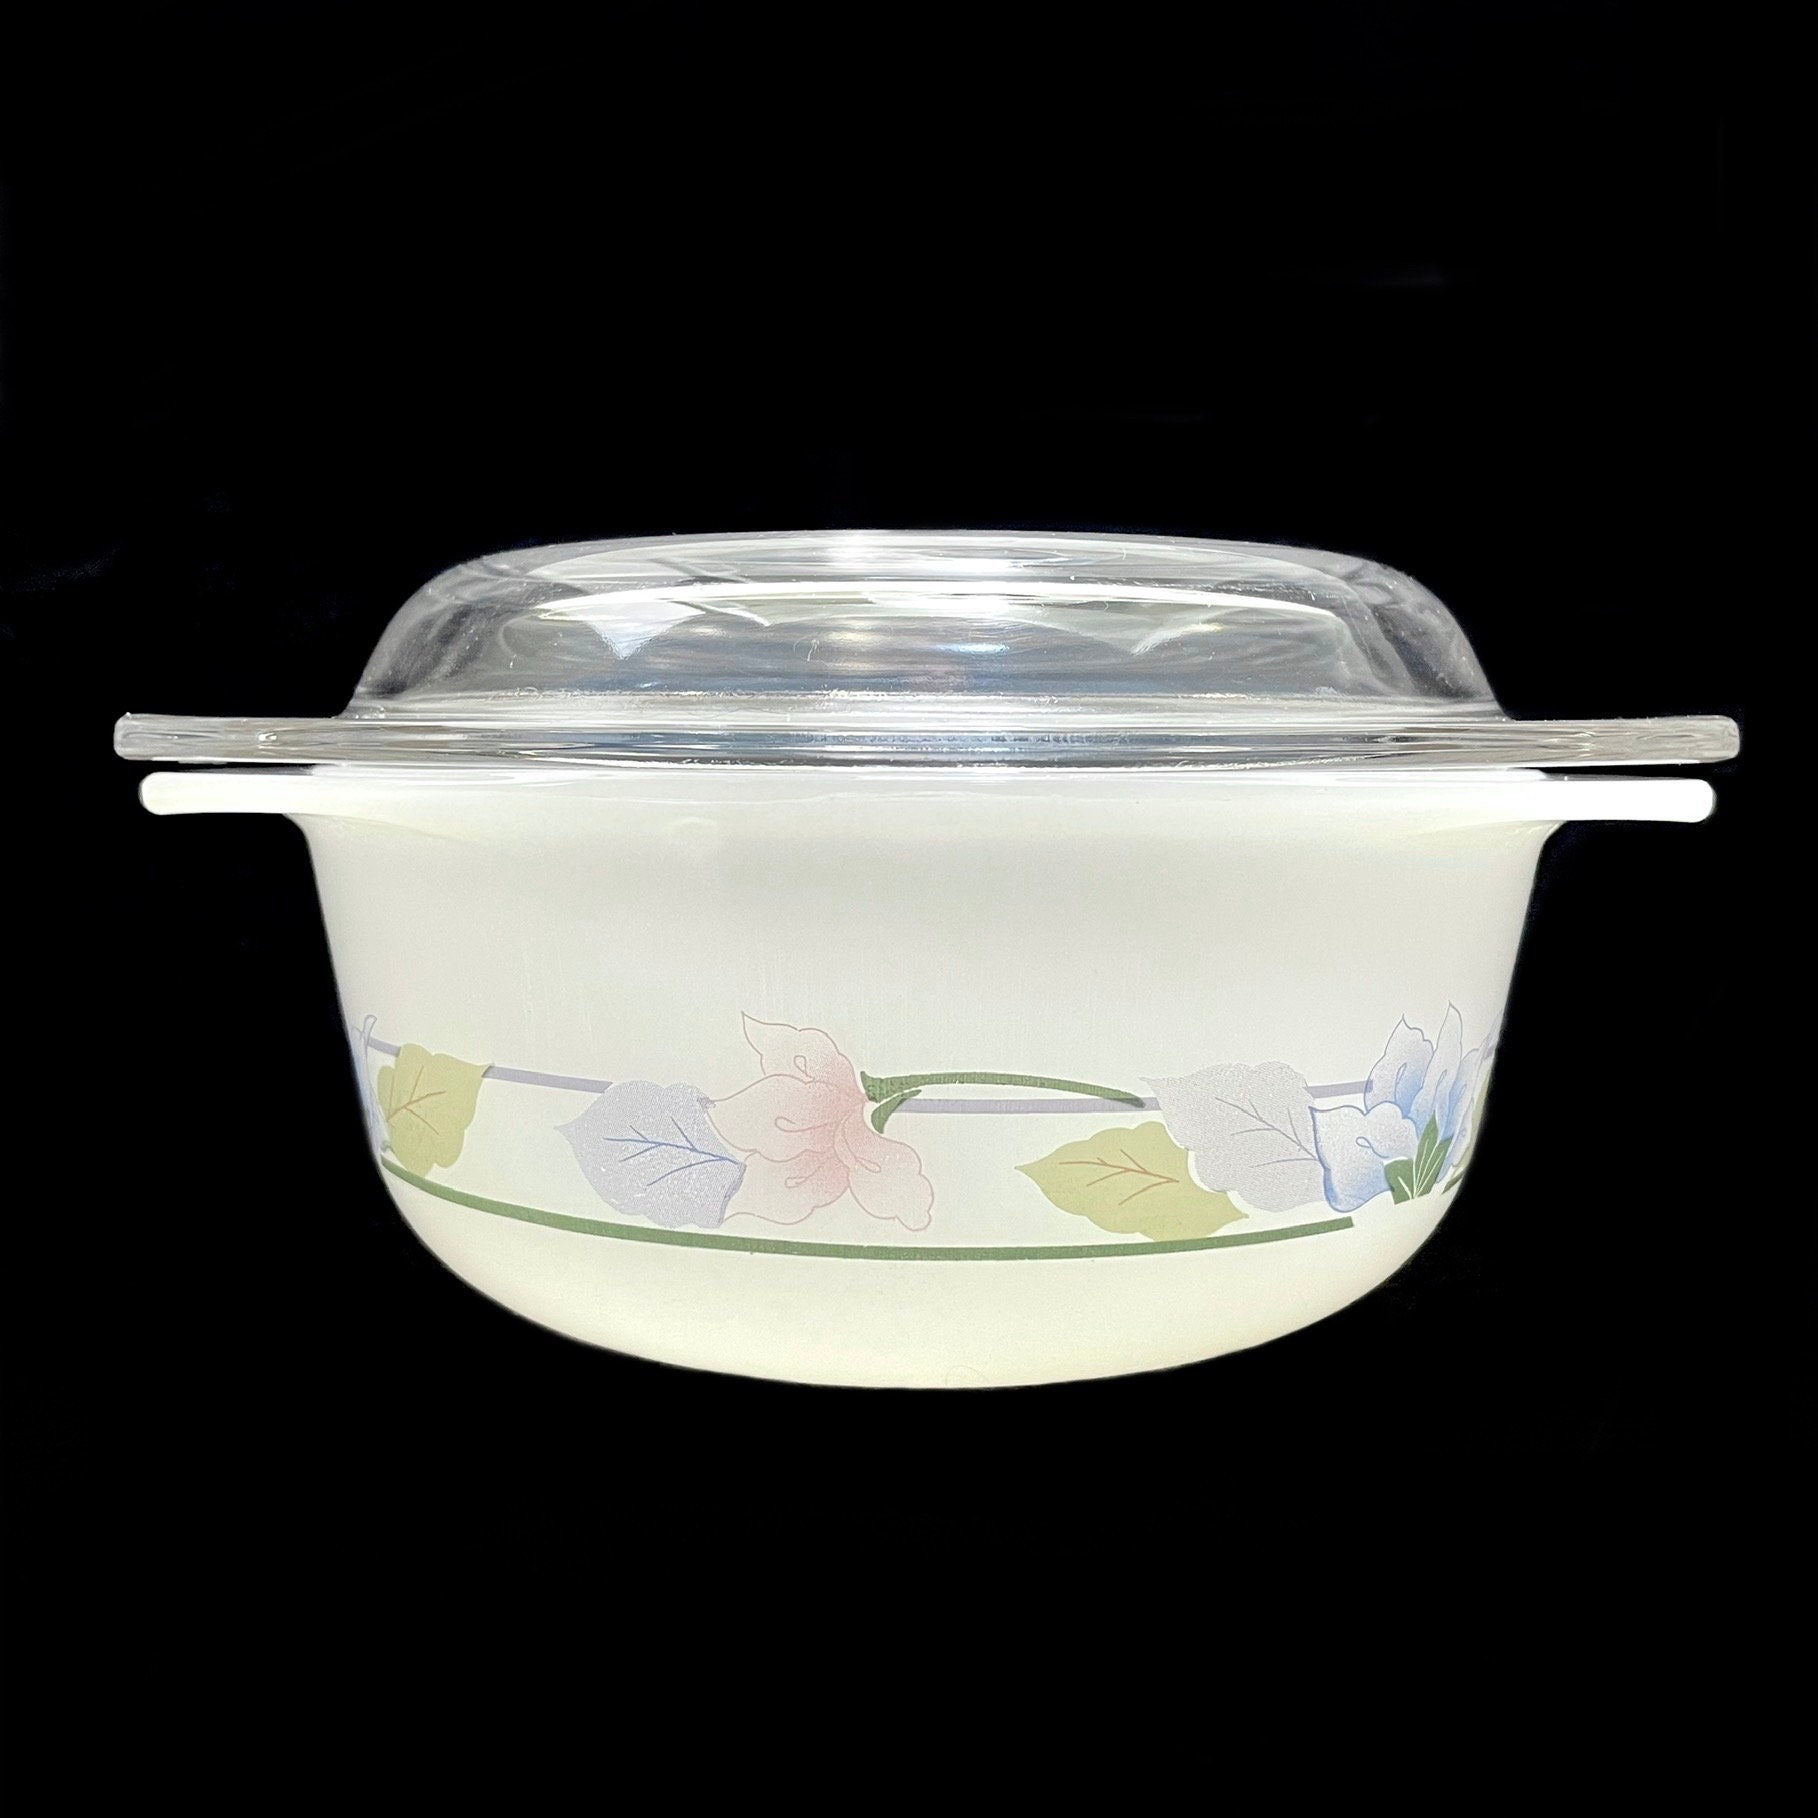 Pie Keeper Carrier 11.75-Inch Glass or Metal Pan Hinged Lid Durable Plastic  NEW